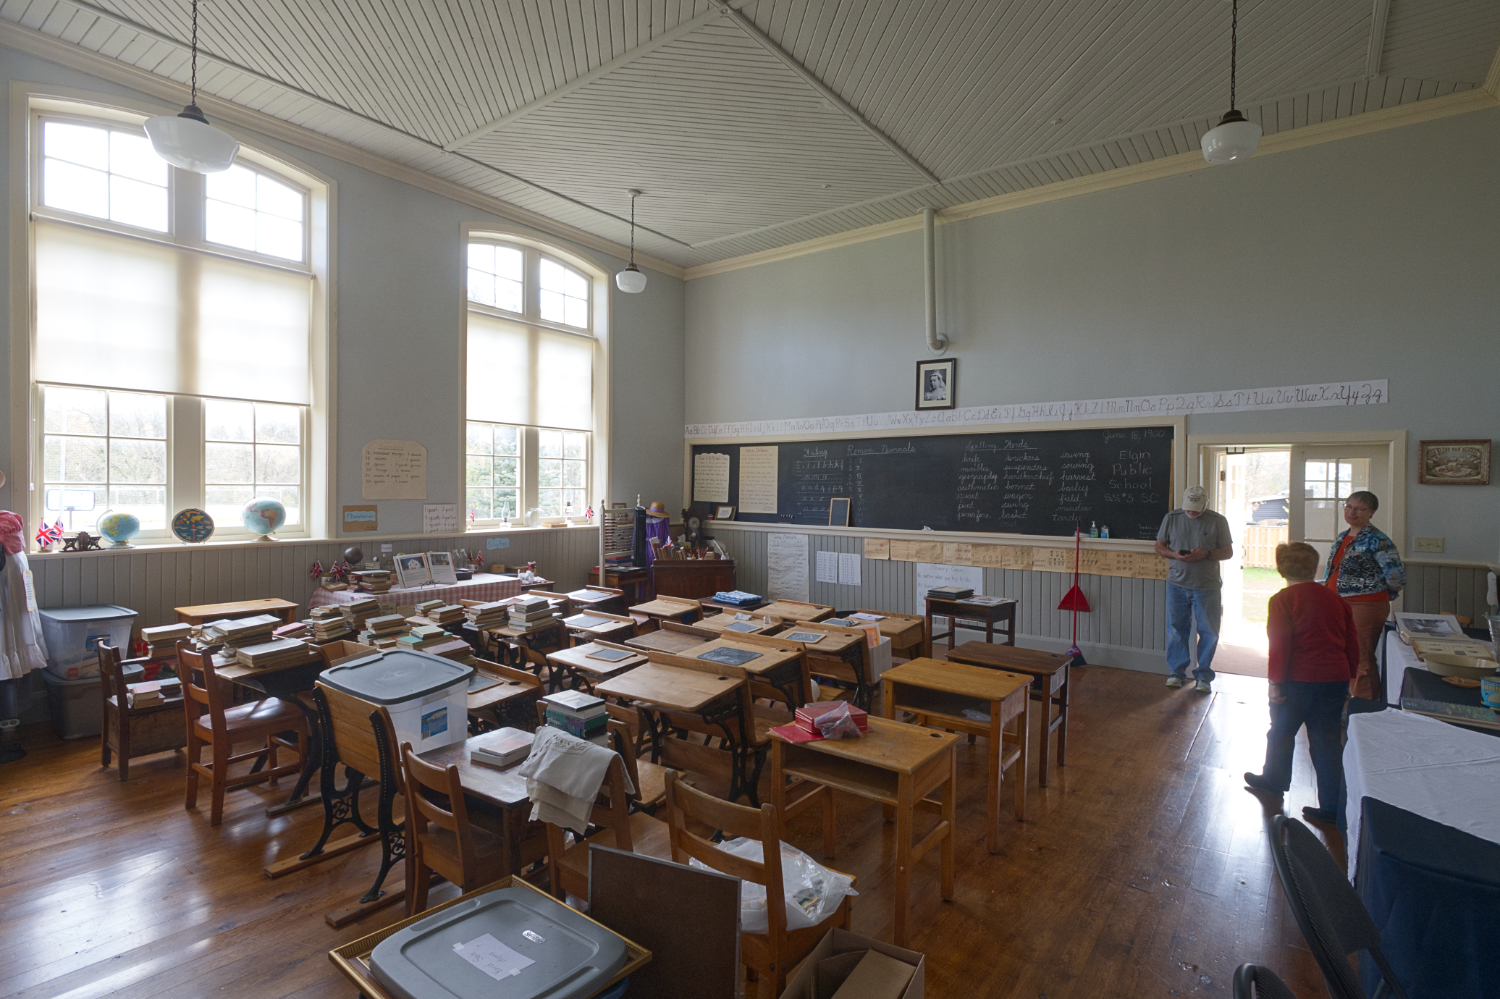 An old classroom full of desks, with big, bright windows.